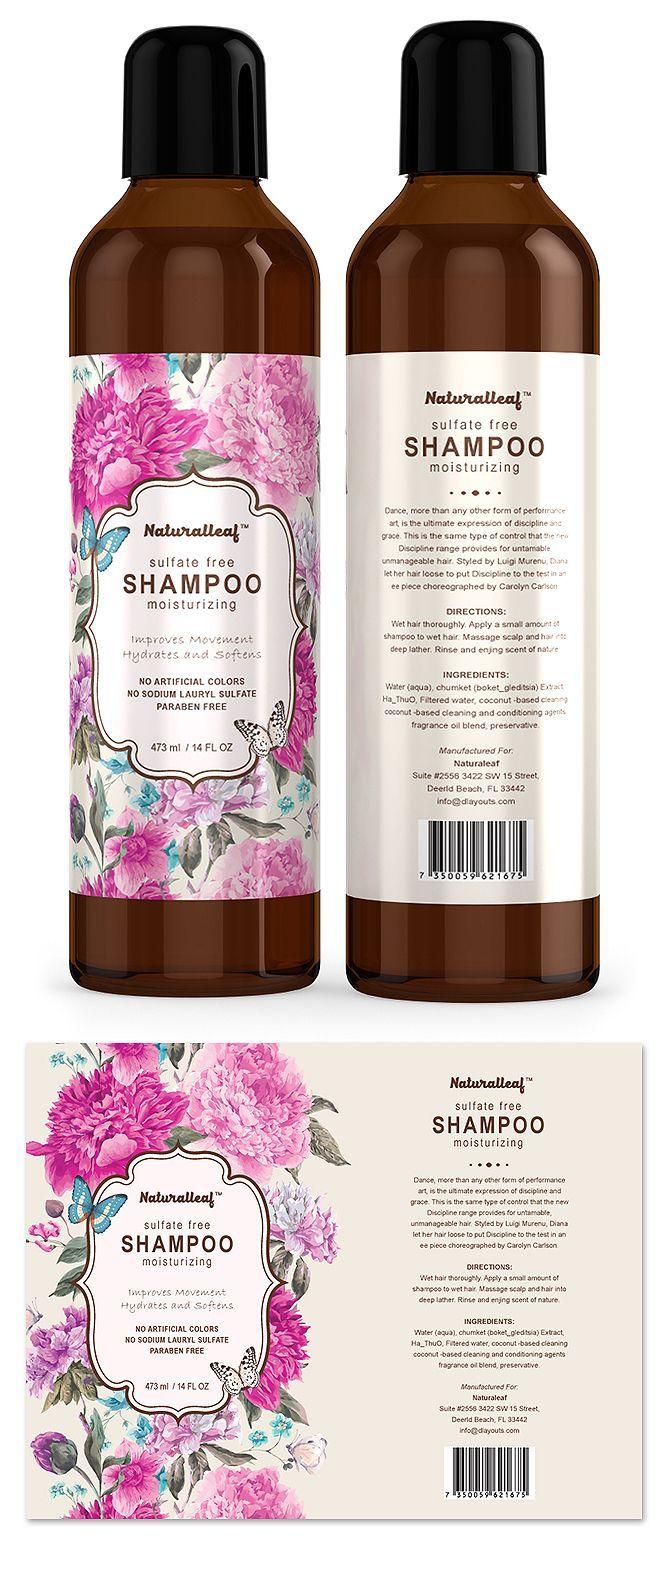 Shampoo Label with Logo - Hair Shampoo Label Template | Graphic Design Label & Packaging ...